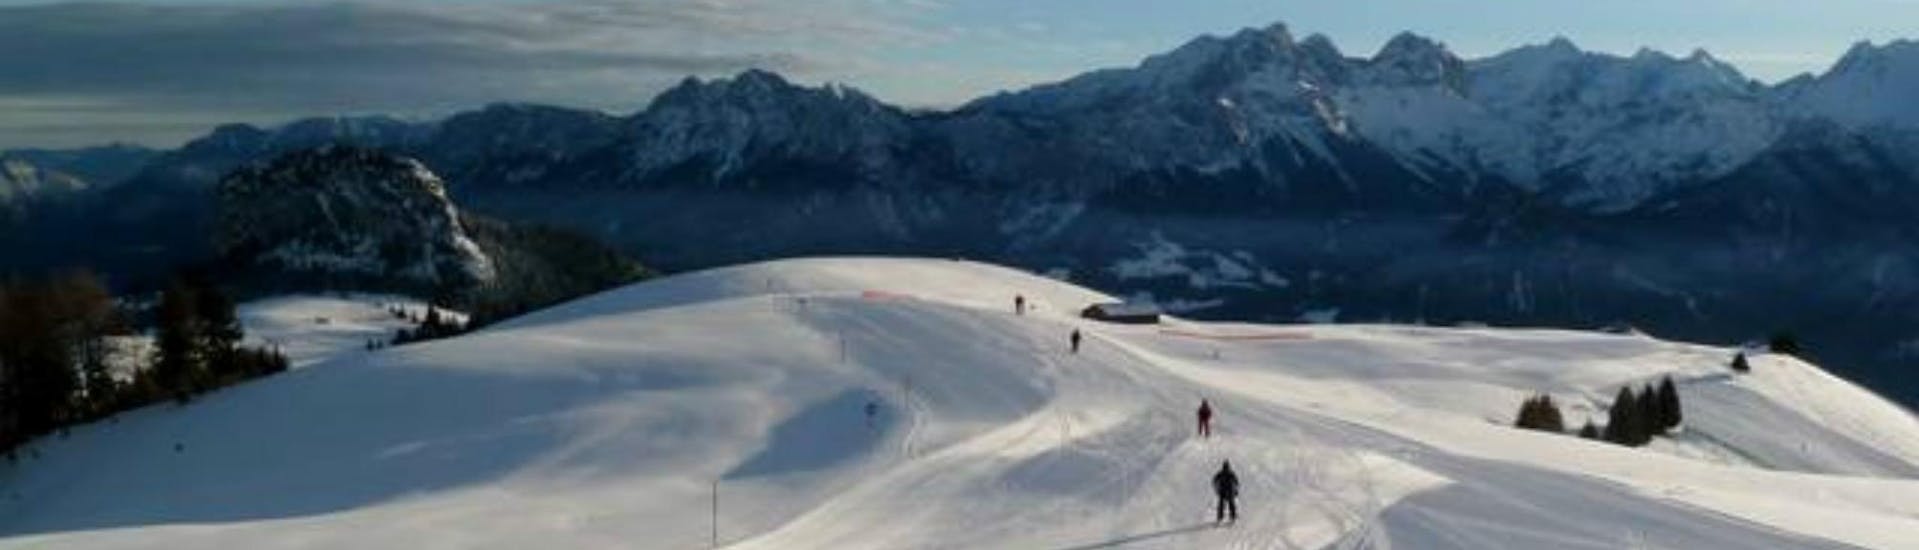 A view of a snowy mountain top in the ski resort of Loser-Altaussee, where ski schools gather to start their ski lessons.